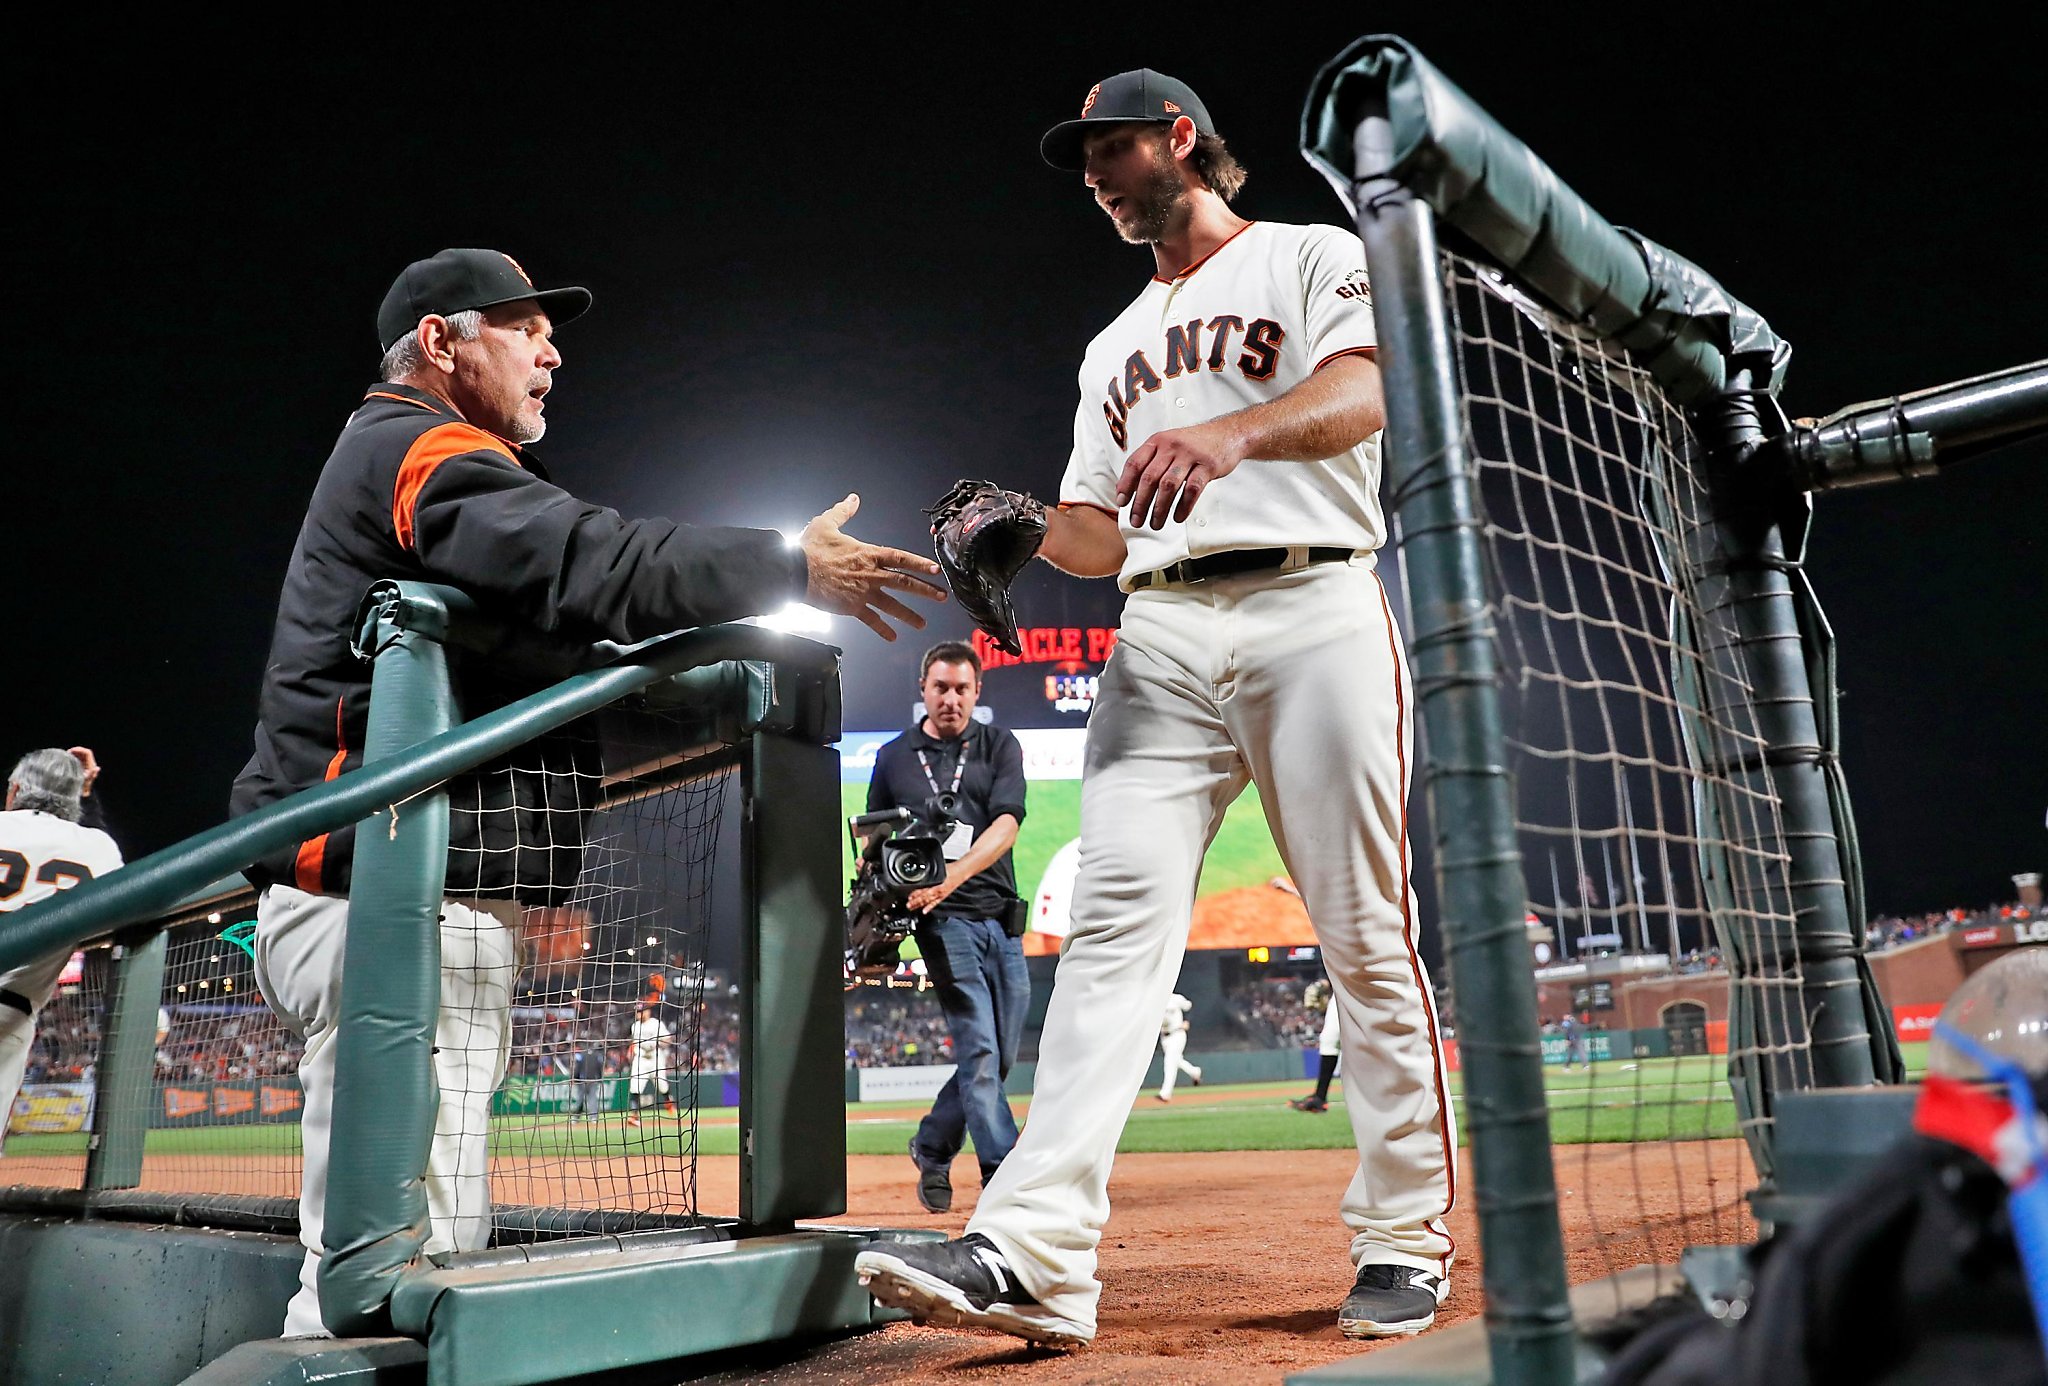 Legacy of a Giant: How Madison Bumgarner made his mark over 10 years in SF